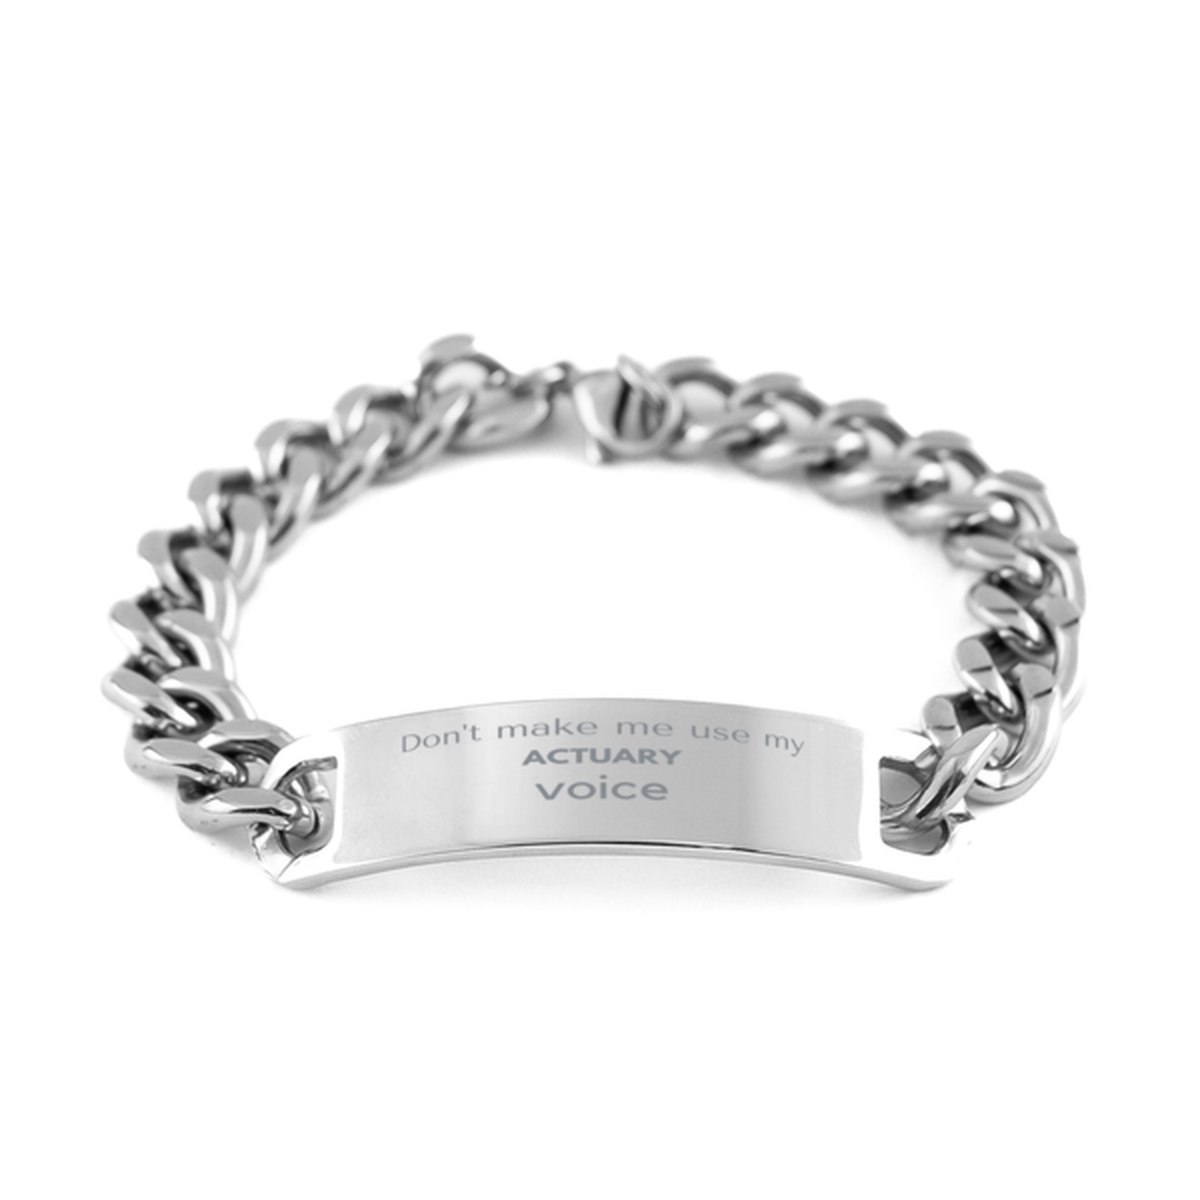 Don't make me use my Actuary voice, Sarcasm Actuary Gifts, Christmas Actuary Cuban Chain Stainless Steel Bracelet Birthday Unique Gifts For Actuary Coworkers, Men, Women, Colleague, Friends